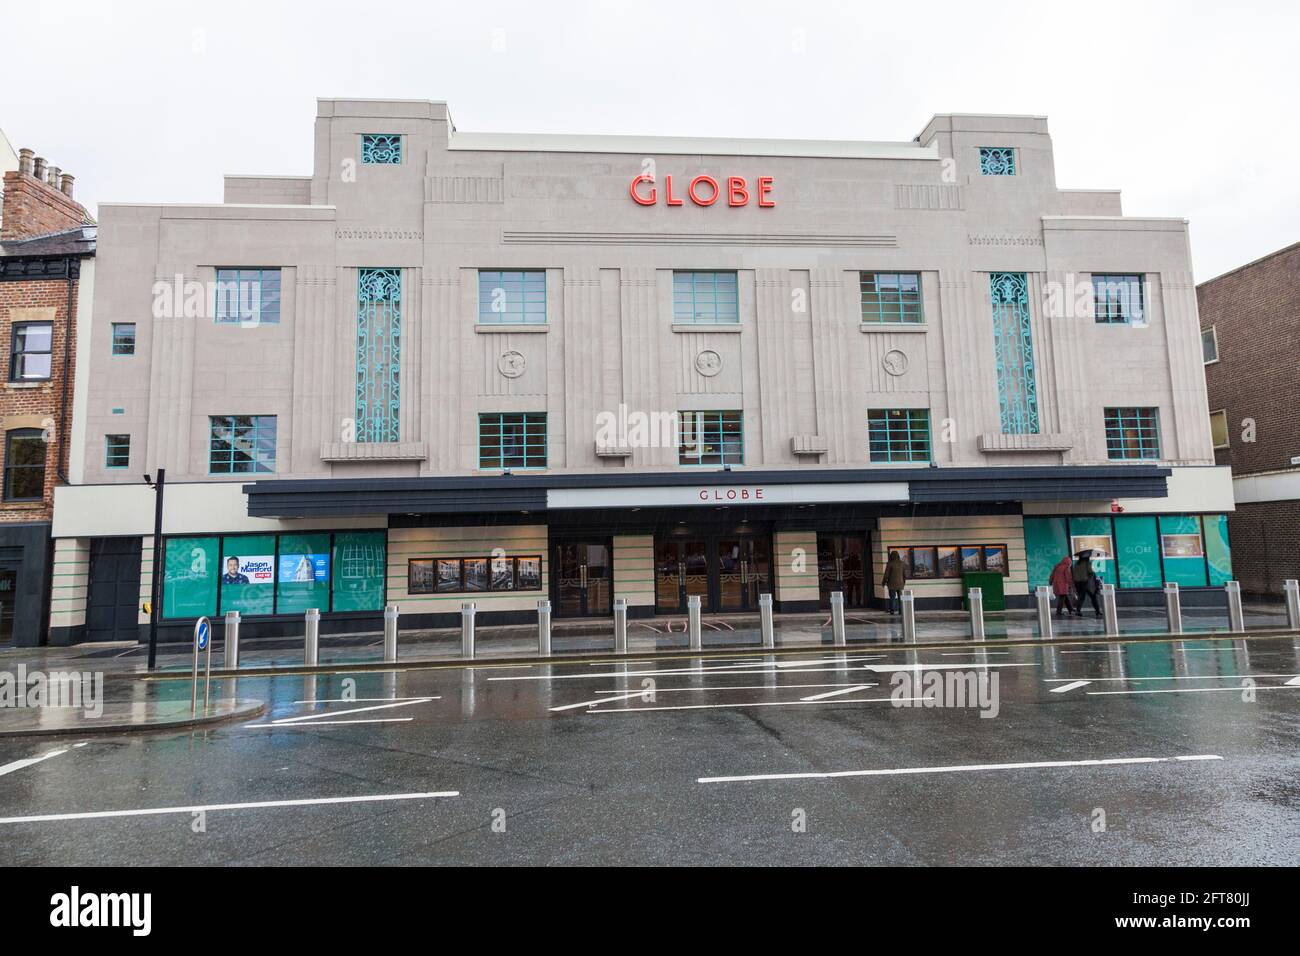 Stockton on Tees,UK. 21st May 2021. The Borough Council announced that the £30m renovation work on the art deco, Globe Theatre, has now been completed and the venue will soon be open to the public. Credit David Dixon  / Alamy Stock Photo